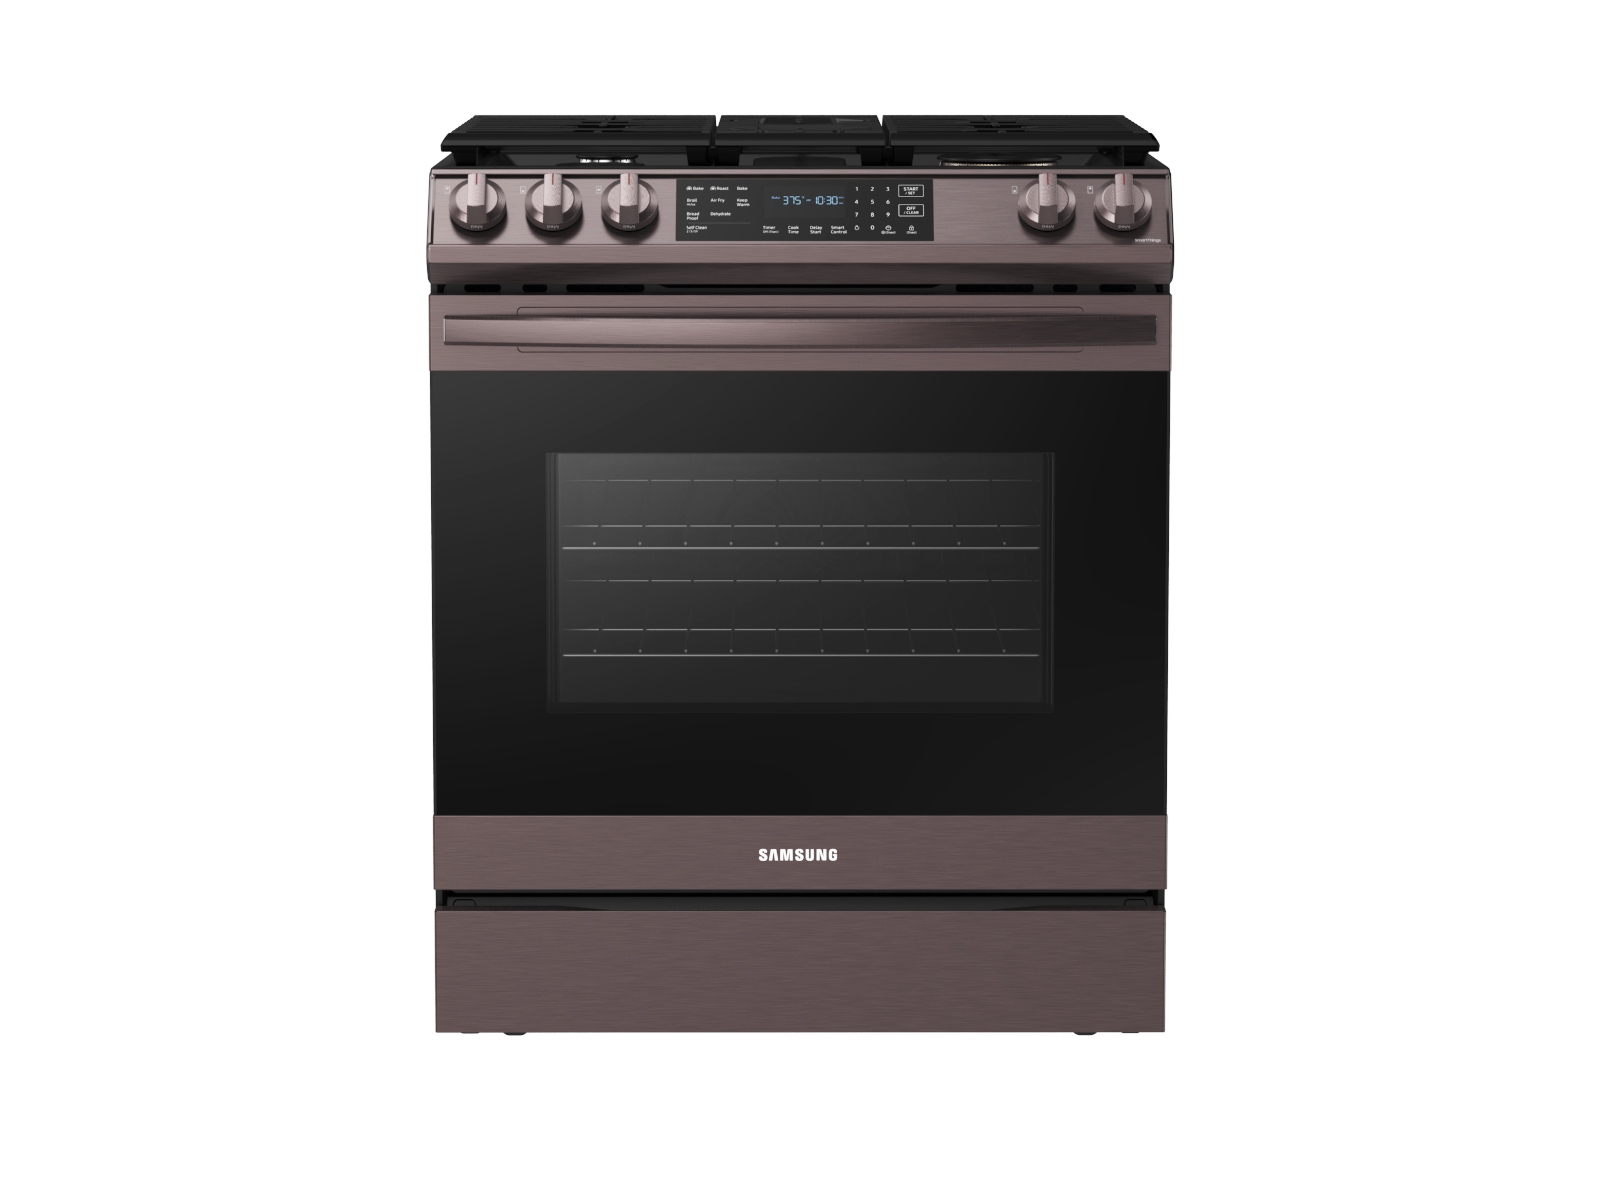 Samsung 6.0 cu. ft. Smart Slide-in Gas Range with Air Fry in Stainless  Steel NX60T8511SS - Superco Appliances, Furniture & Home Design